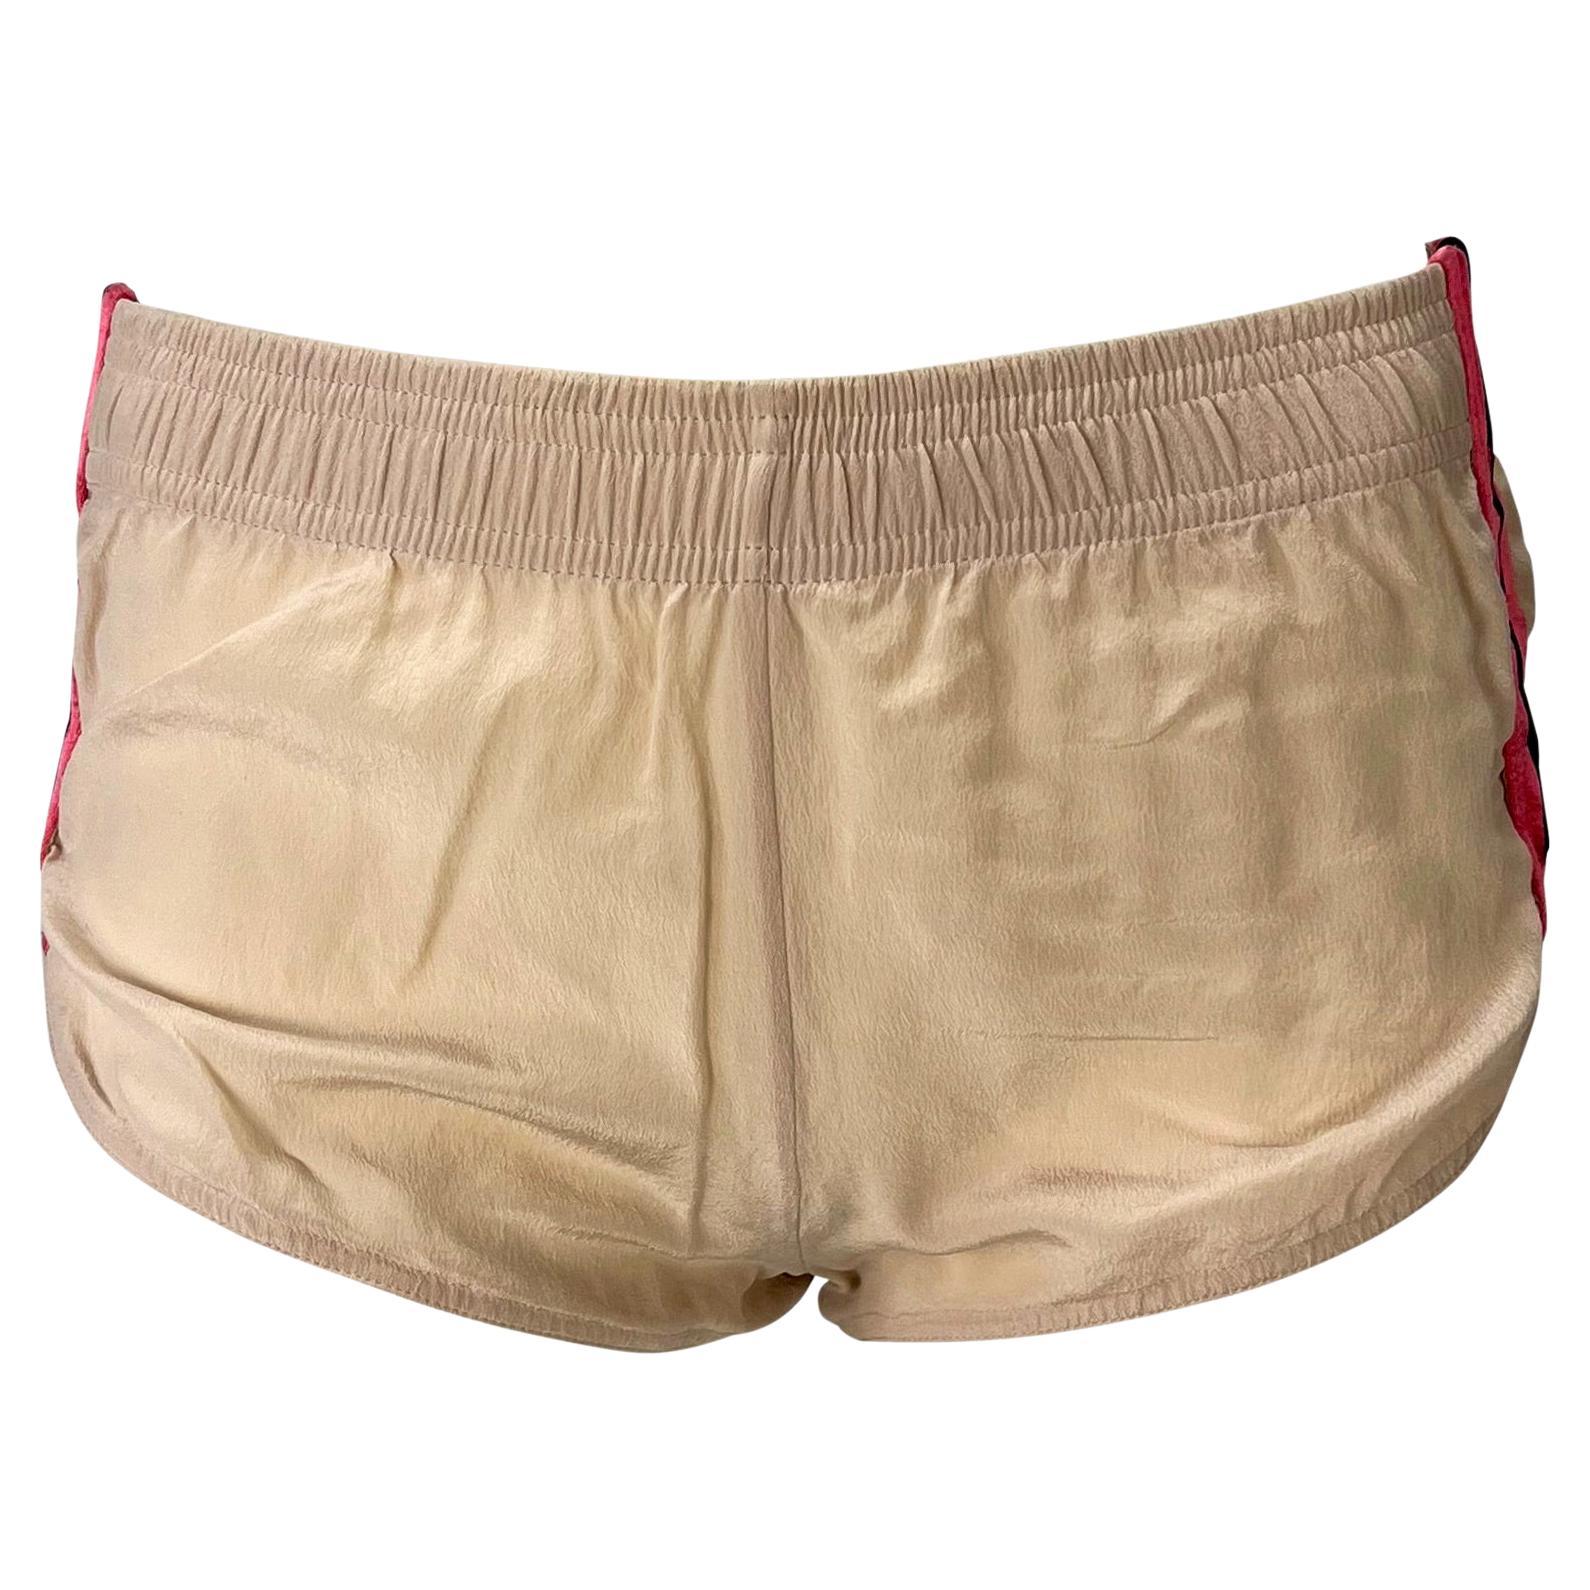 S/S 2004 Gucci by Tom Ford Runway Beige Silk Pink Stripe Mini Shorts For Sale 3